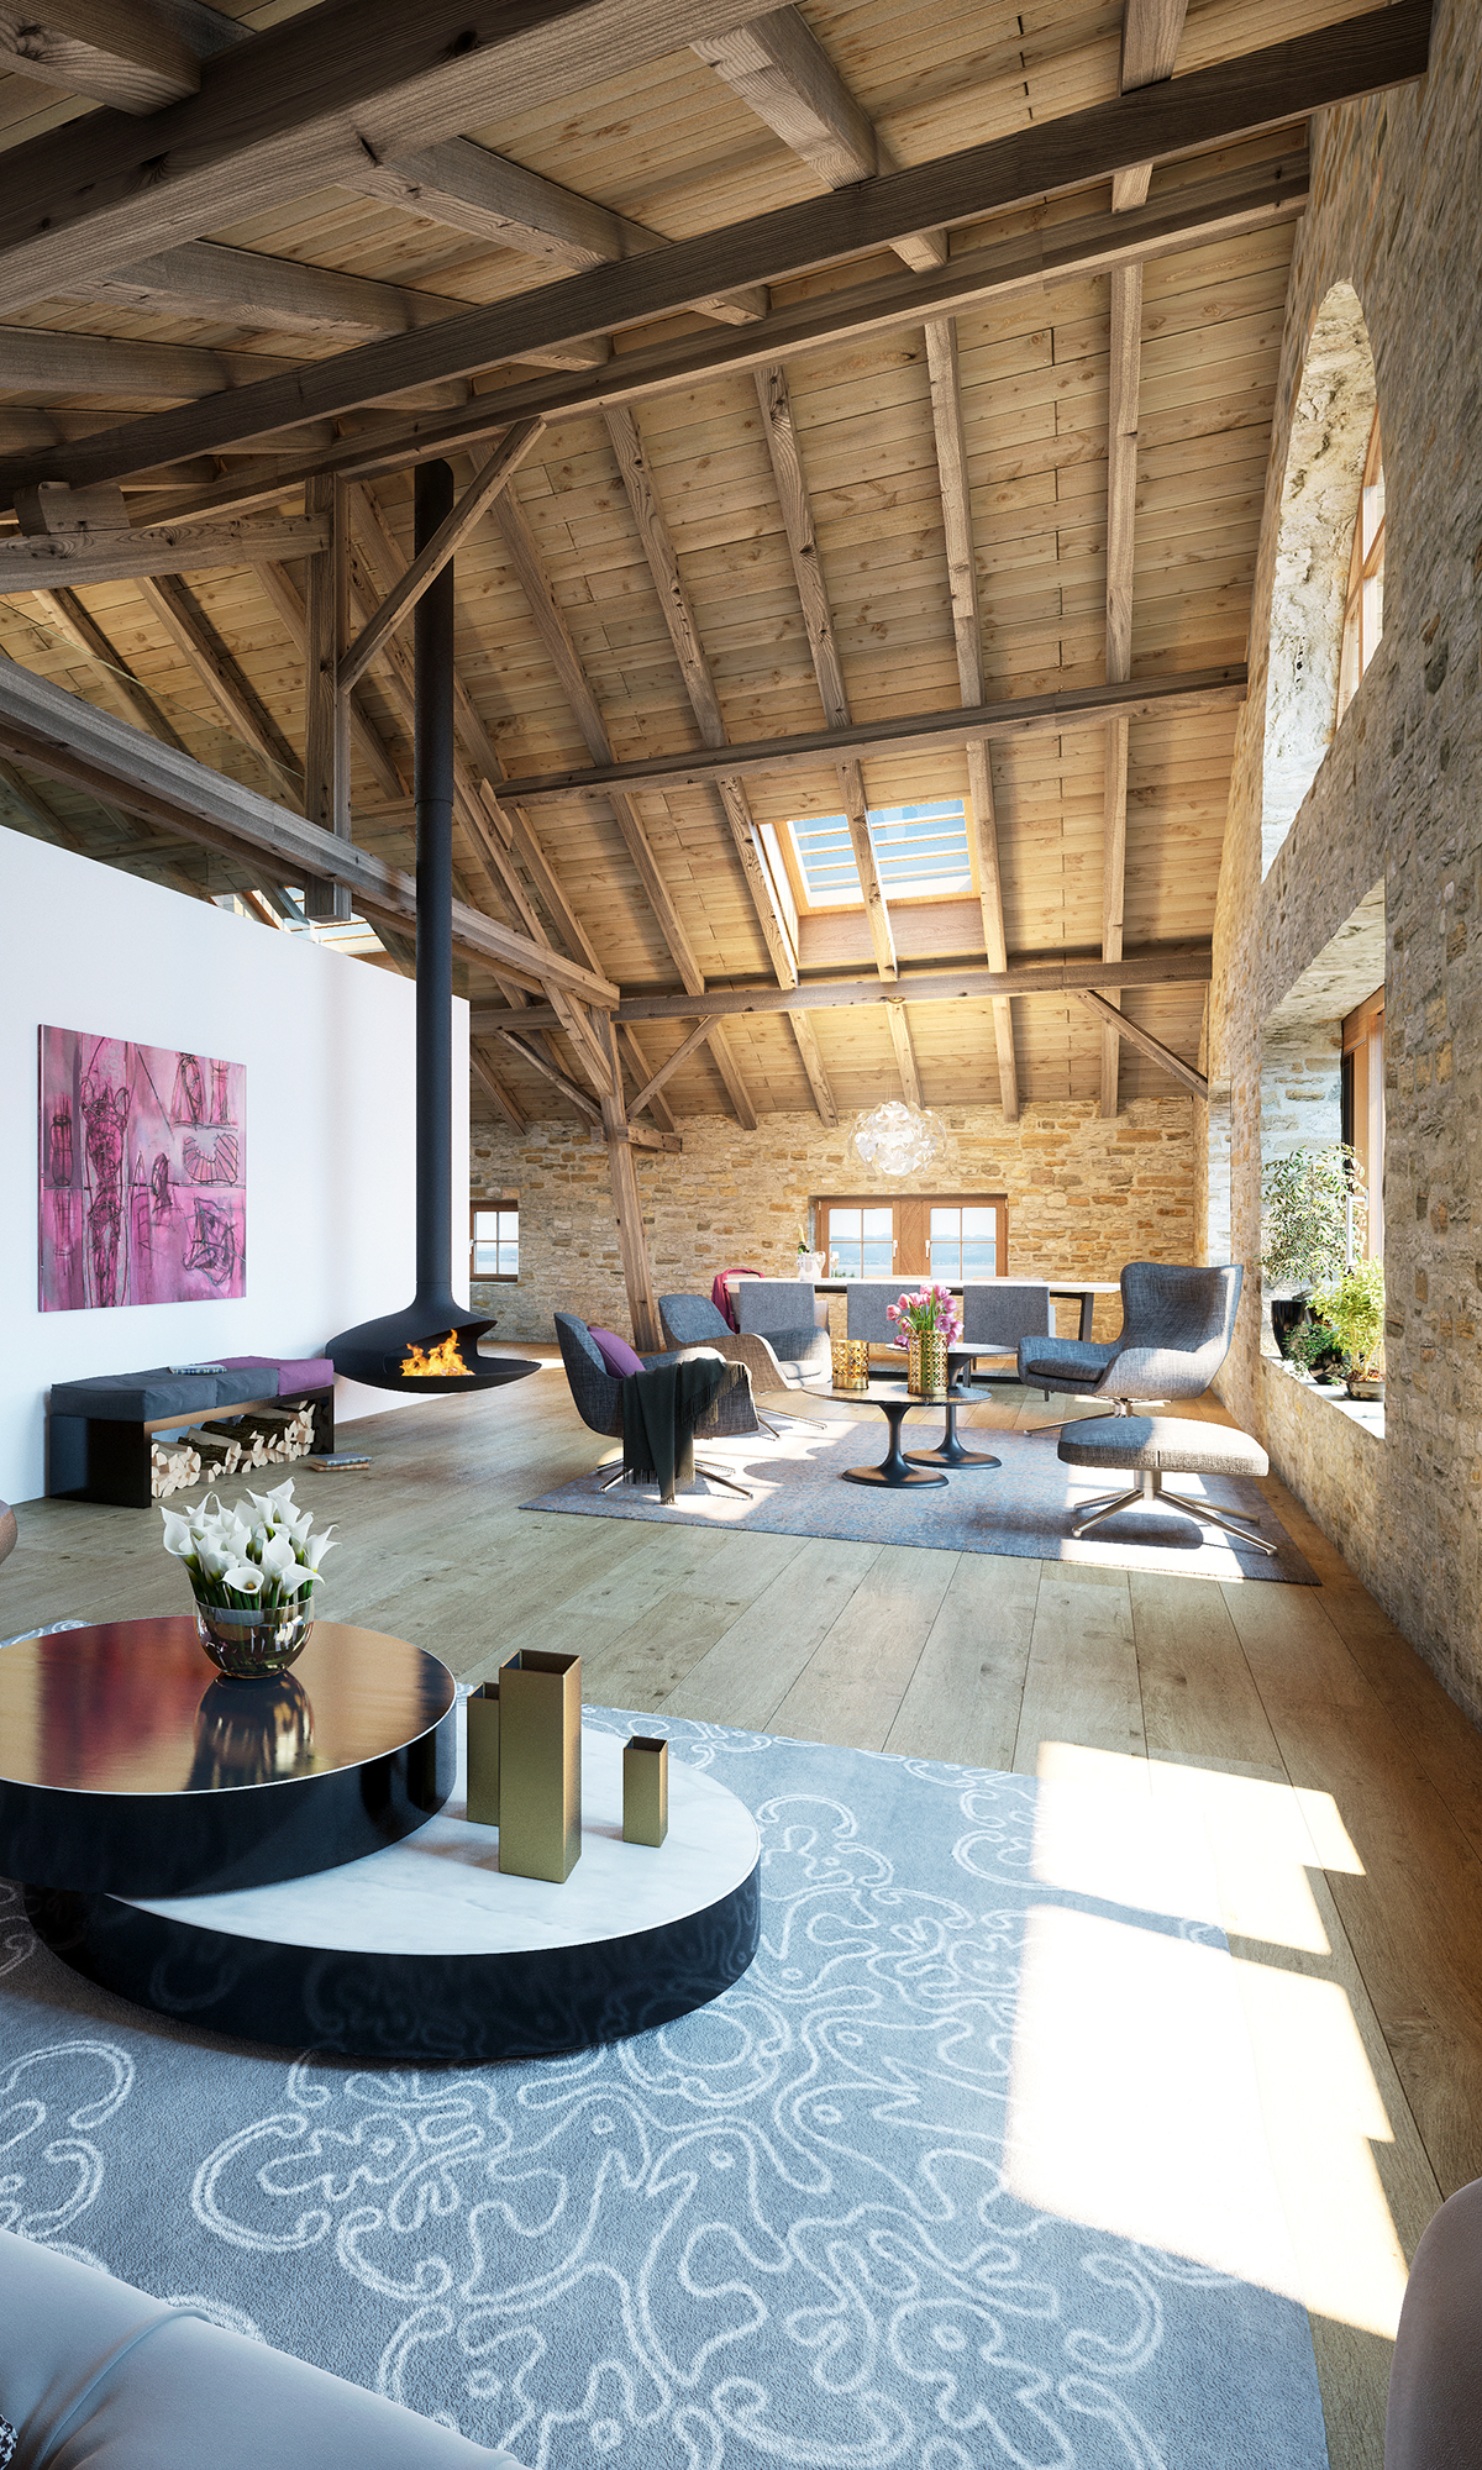 Living area of the Romanshorn granary conversion finished with a fireplace and seating to create a pleasant ambience